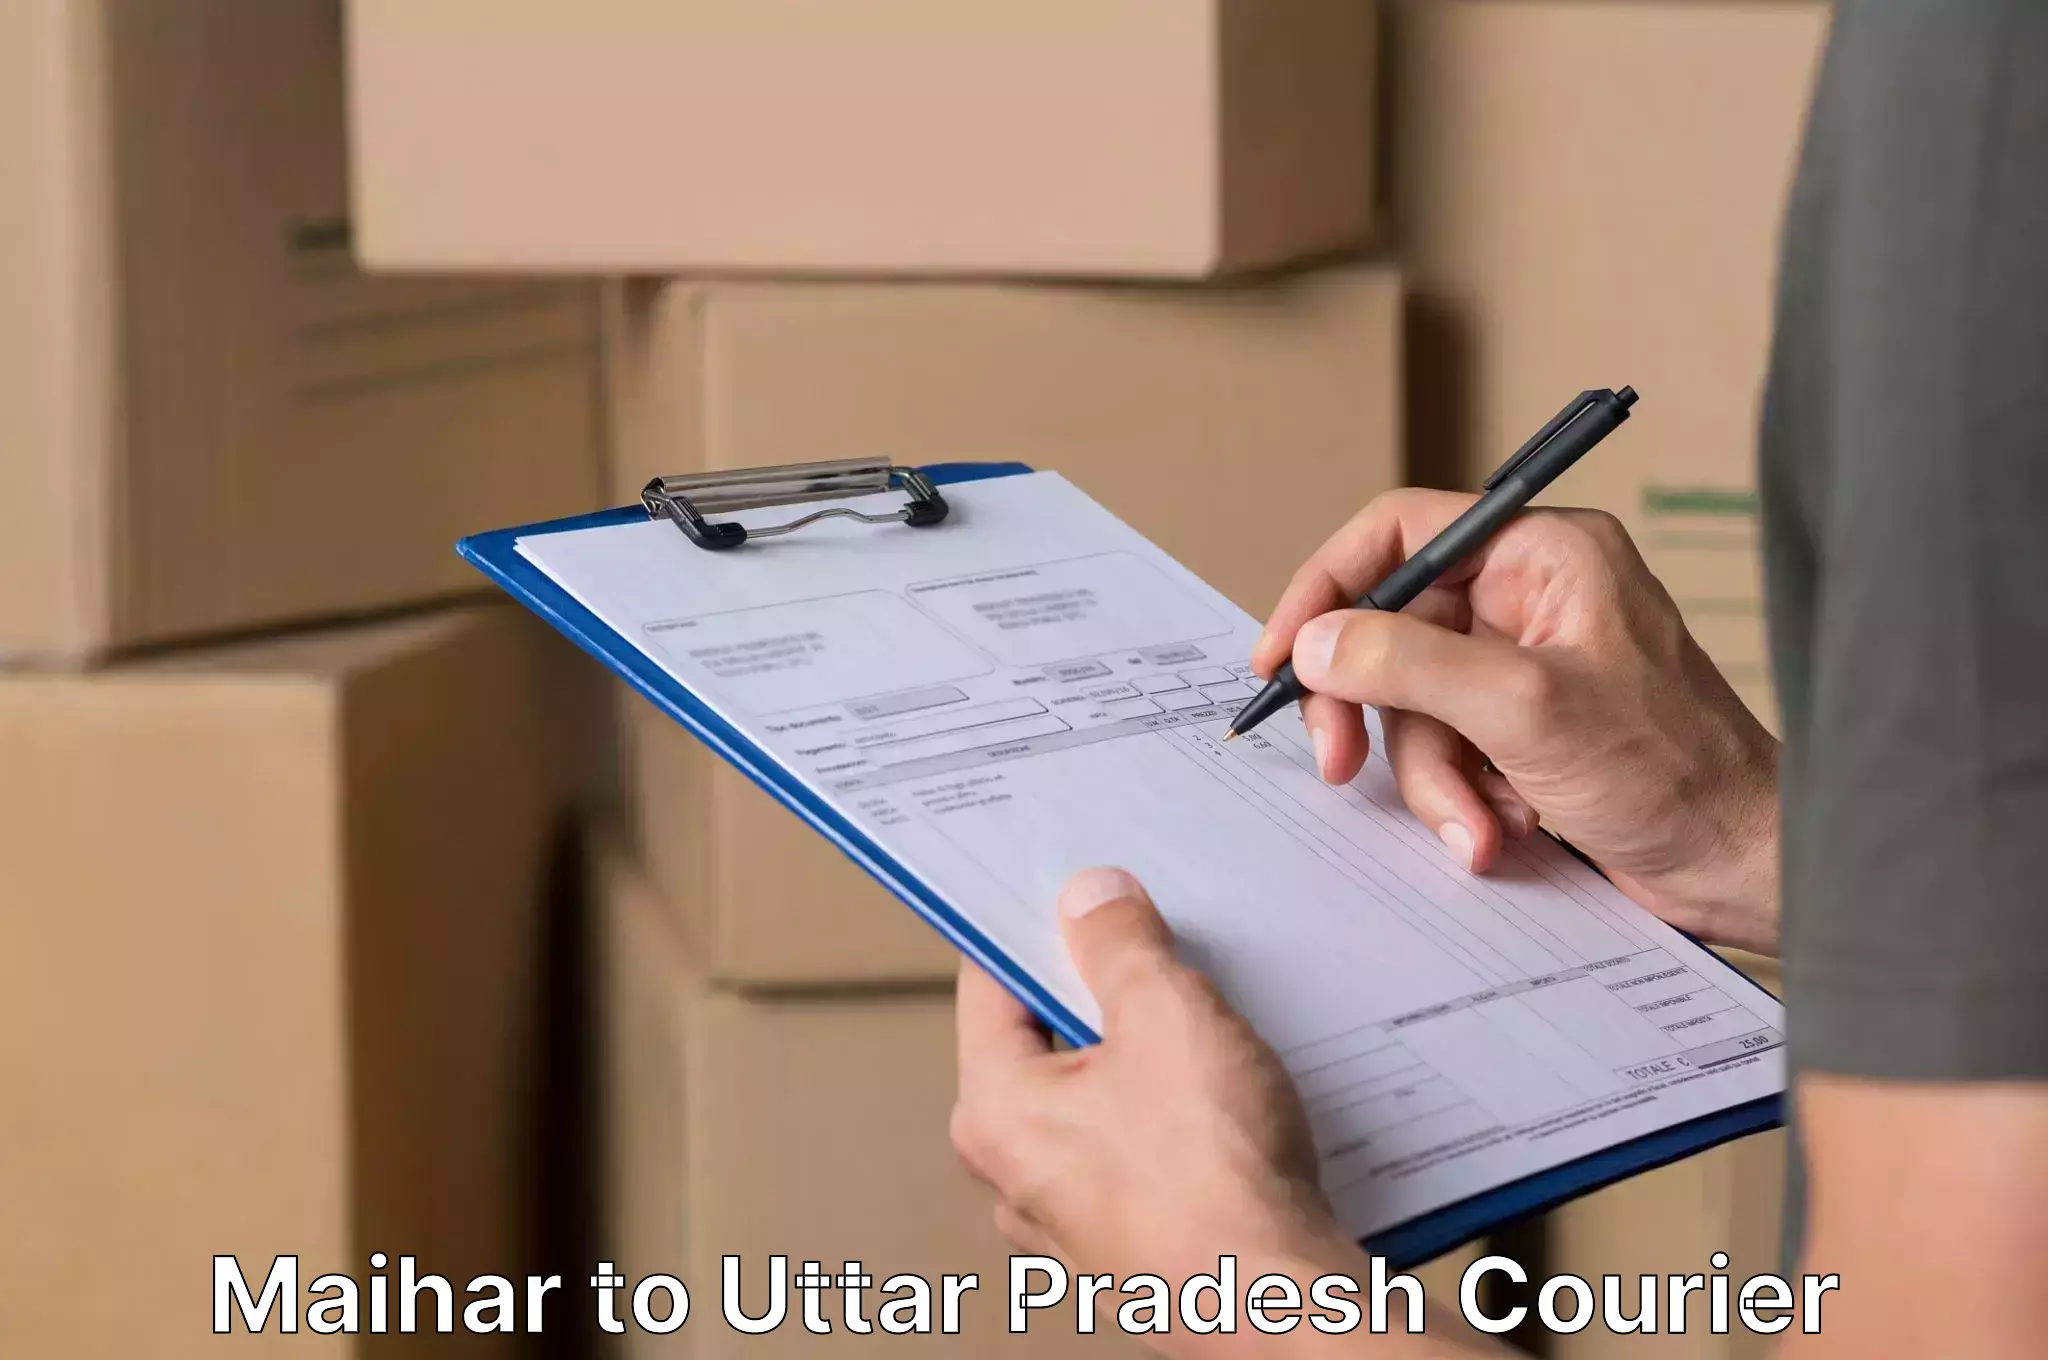 Professional relocation services Maihar to Dadri